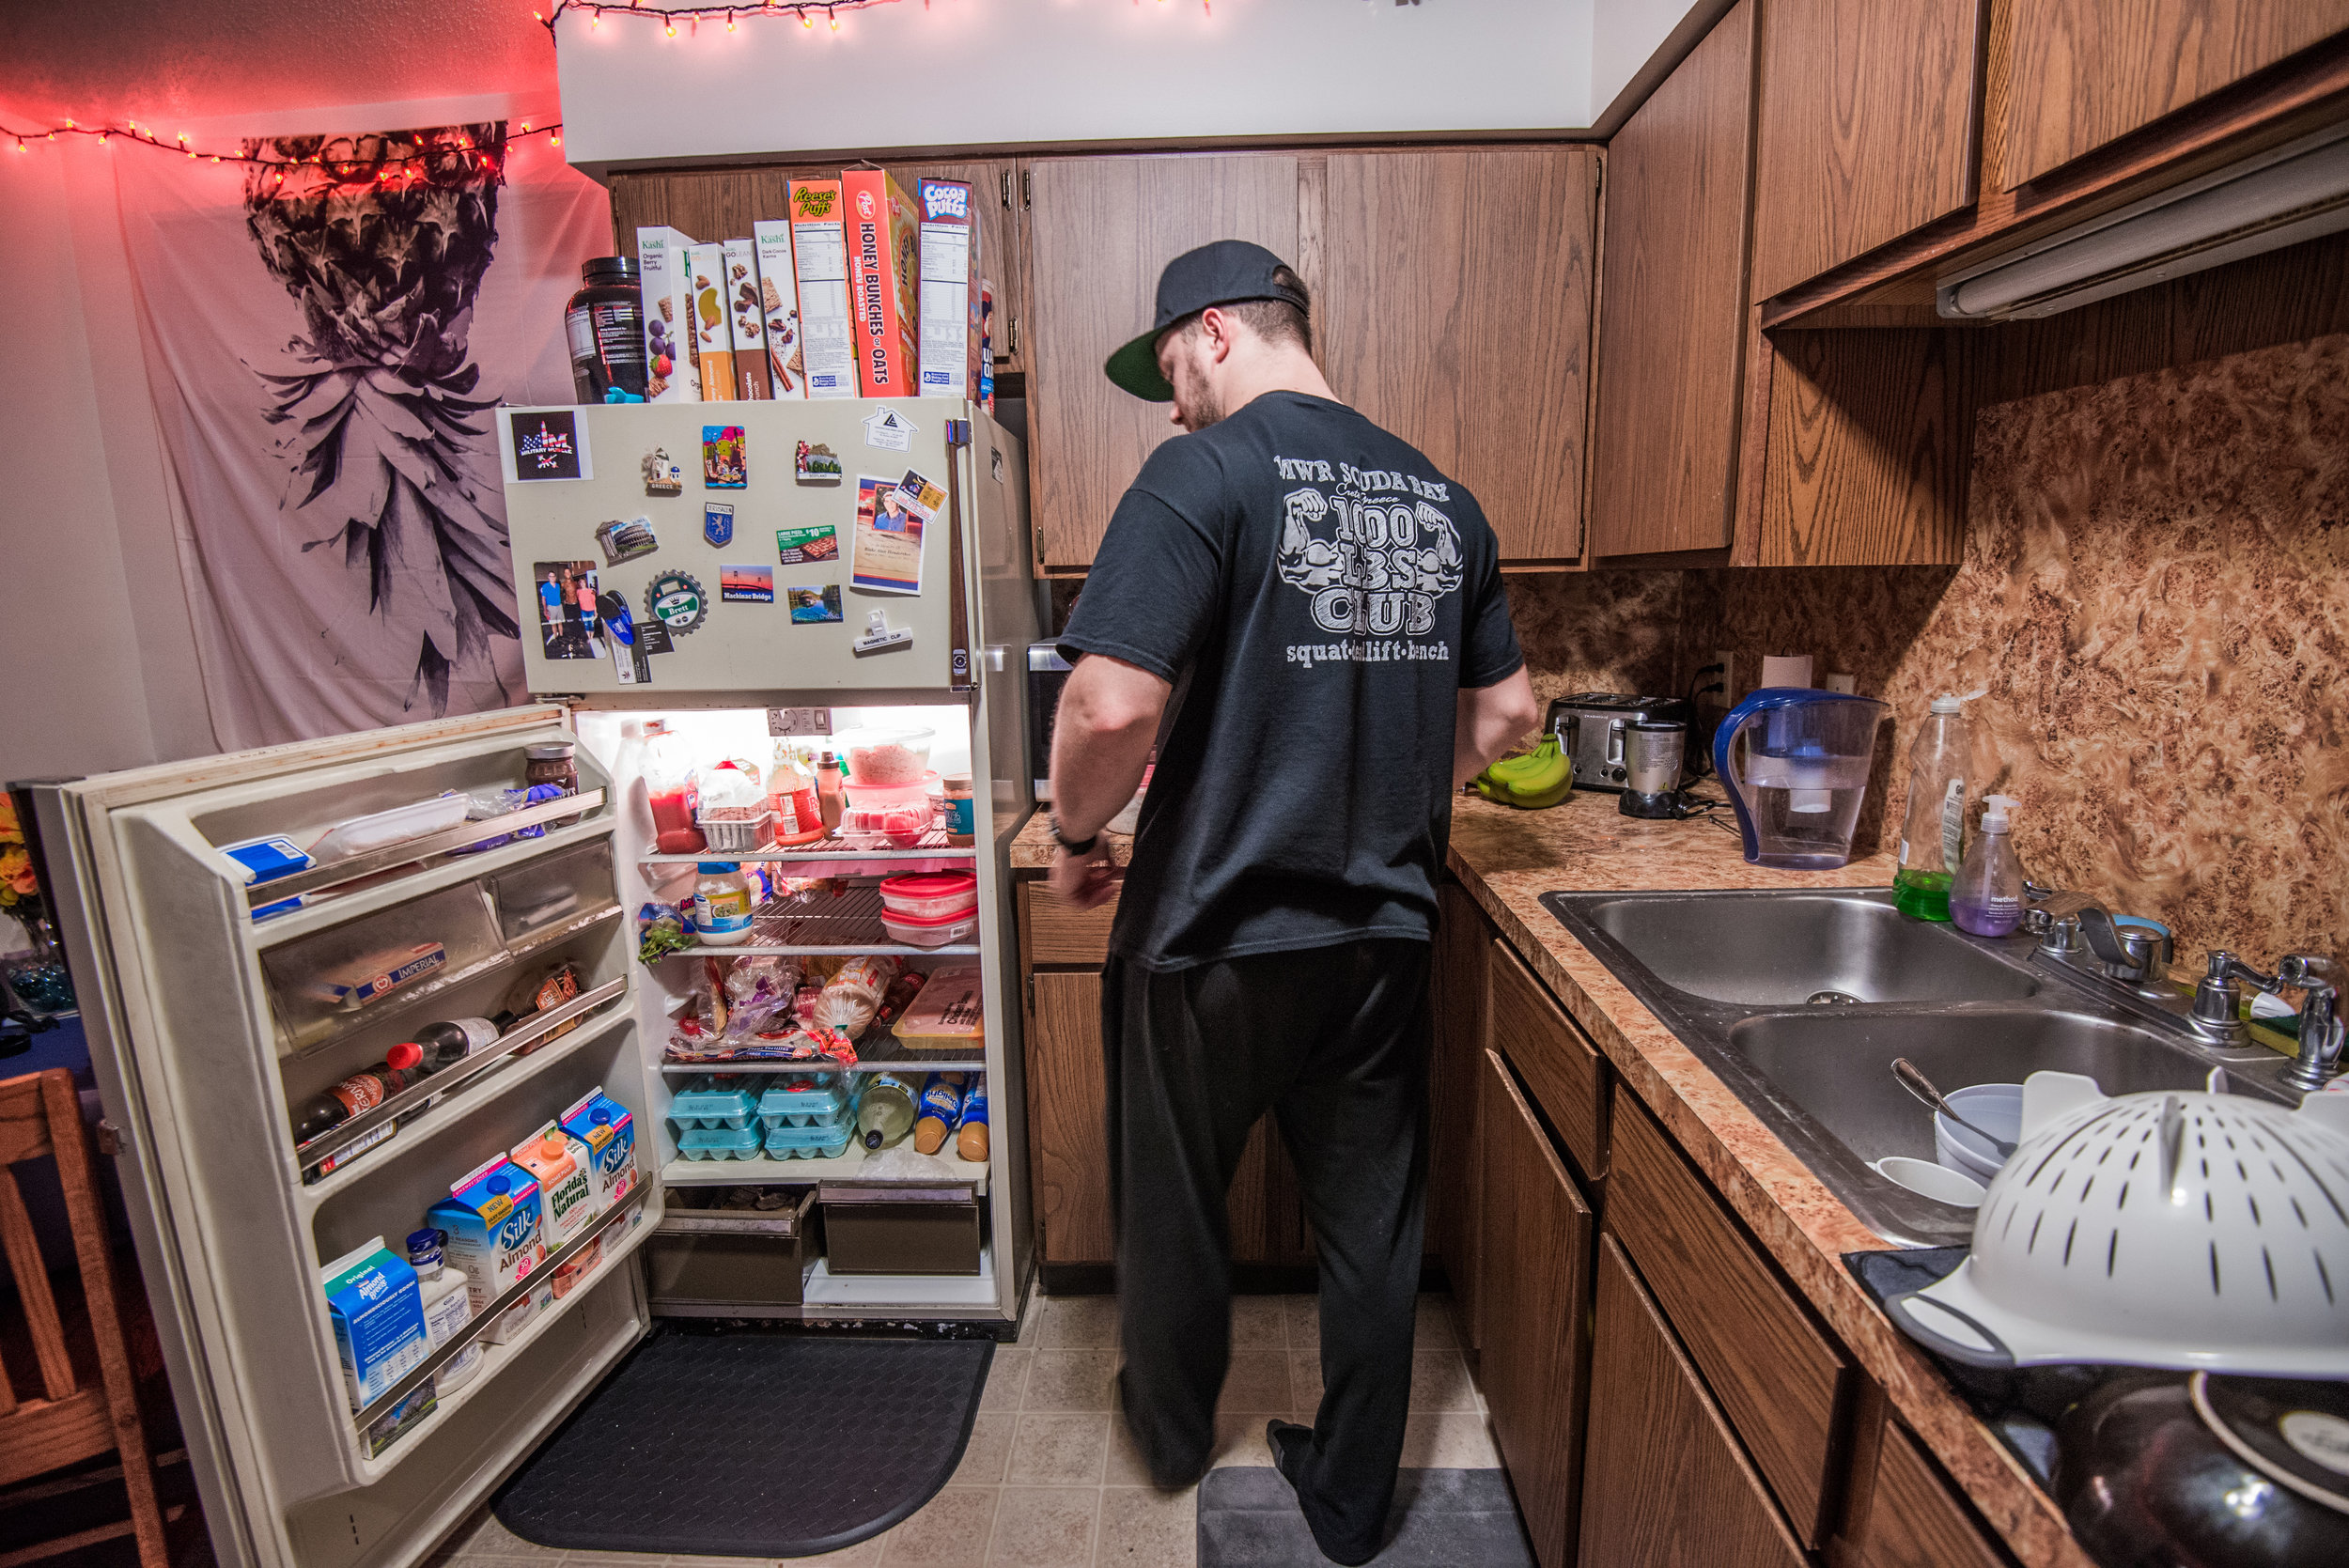  Brett prepares chicken and rice in the kitchen of his home, Oct. 10 in Mount Pleasant, Michigan. "We're not super concerned with eating too much as long as we're not eating too little," Brett said. 